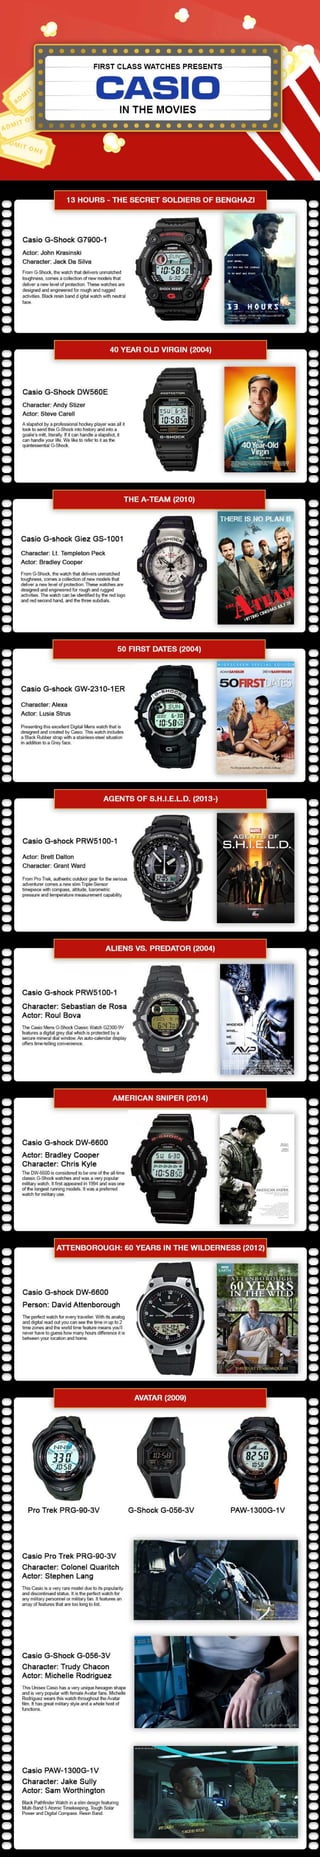 Casio watches in the movies